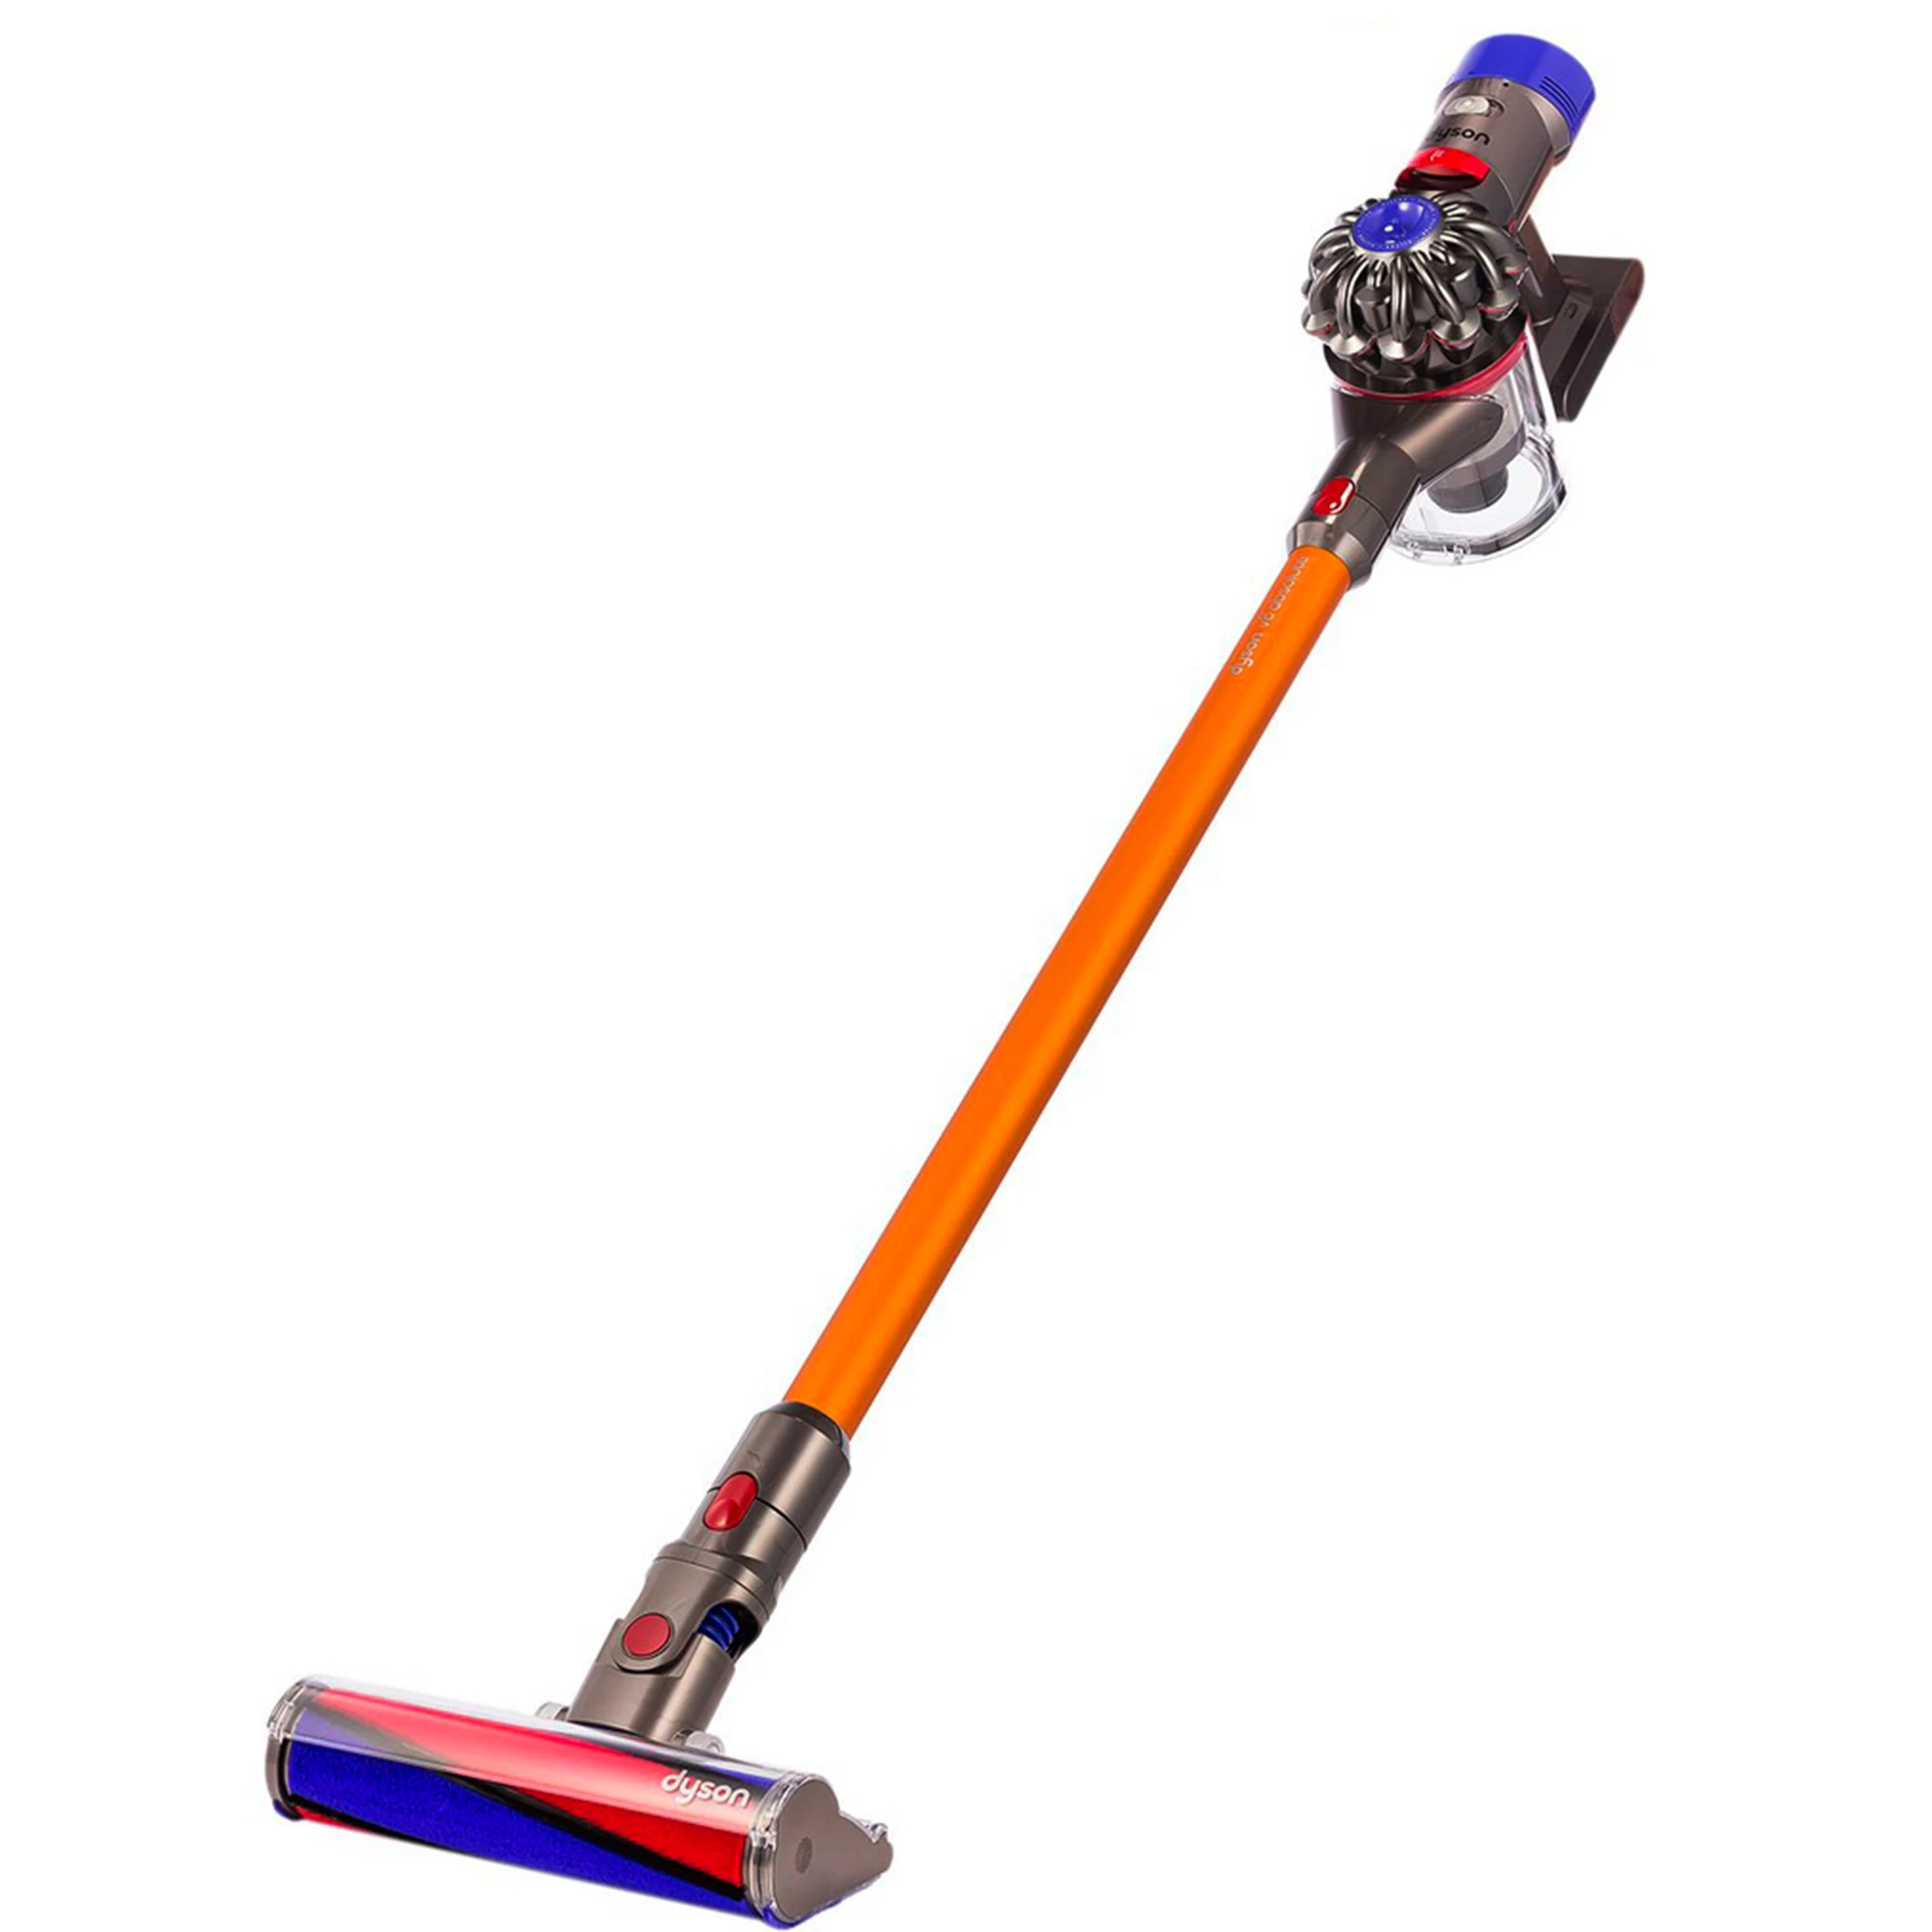 Absolute 8. Пылесос Dyson v8 absolute. Беспроводной пылесос Dyson v8 absolute. Пылесос Дайсон беспроводной v8. Пылесос вертикальный Dyson v8 absolute+.